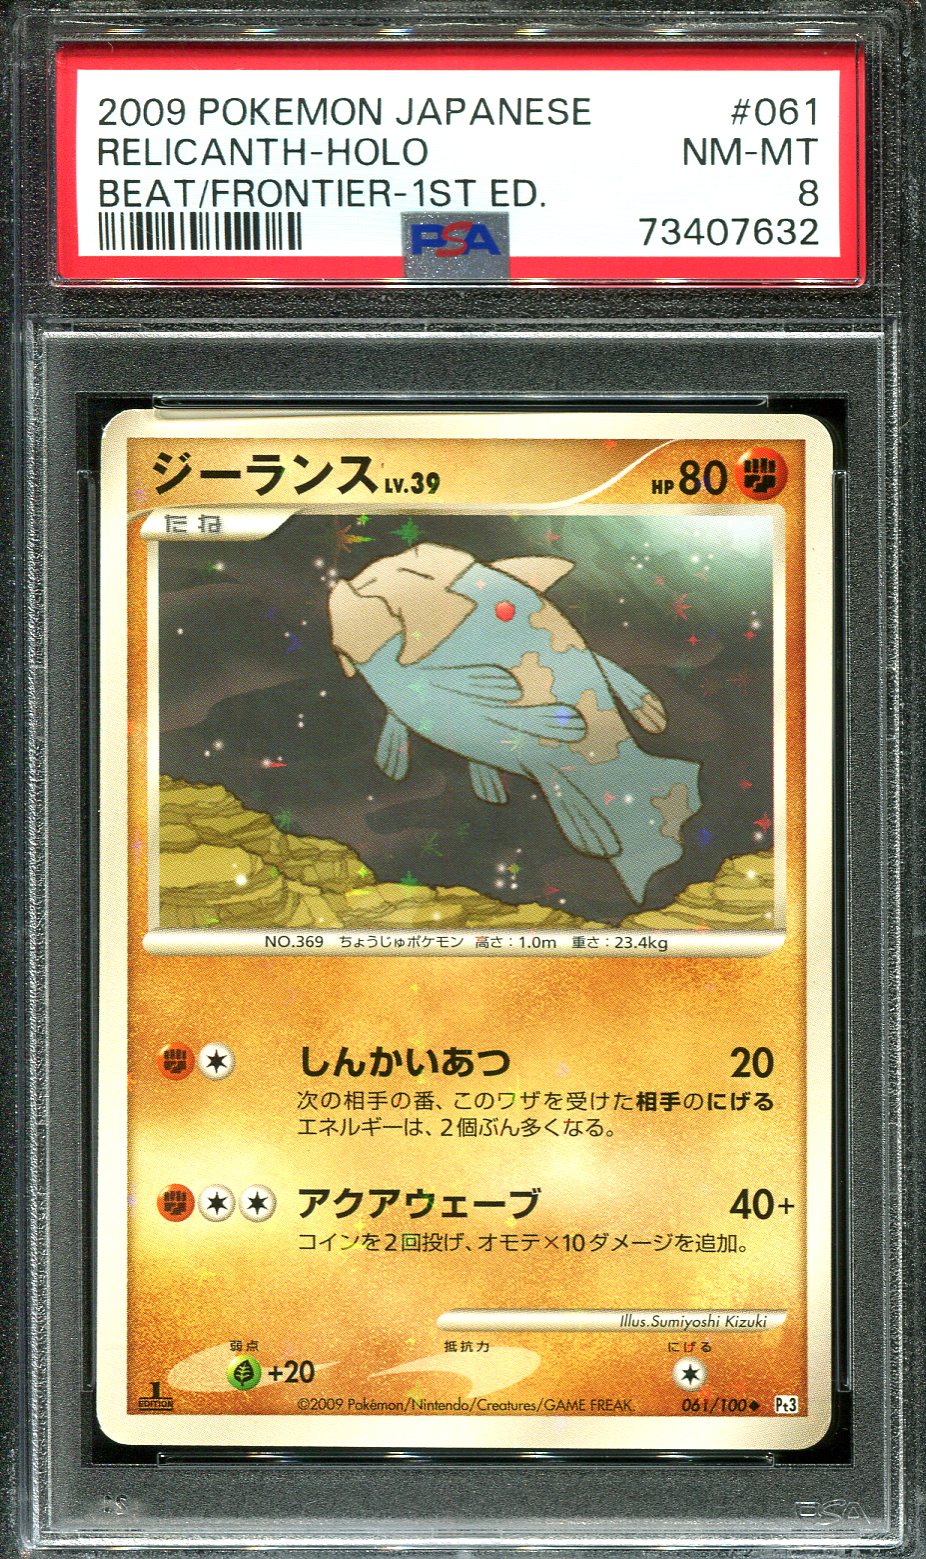 RELICANTH 061/100 PSA 8 POKEMON BEAT FRONTIER PT3 JAPANESE HOLO